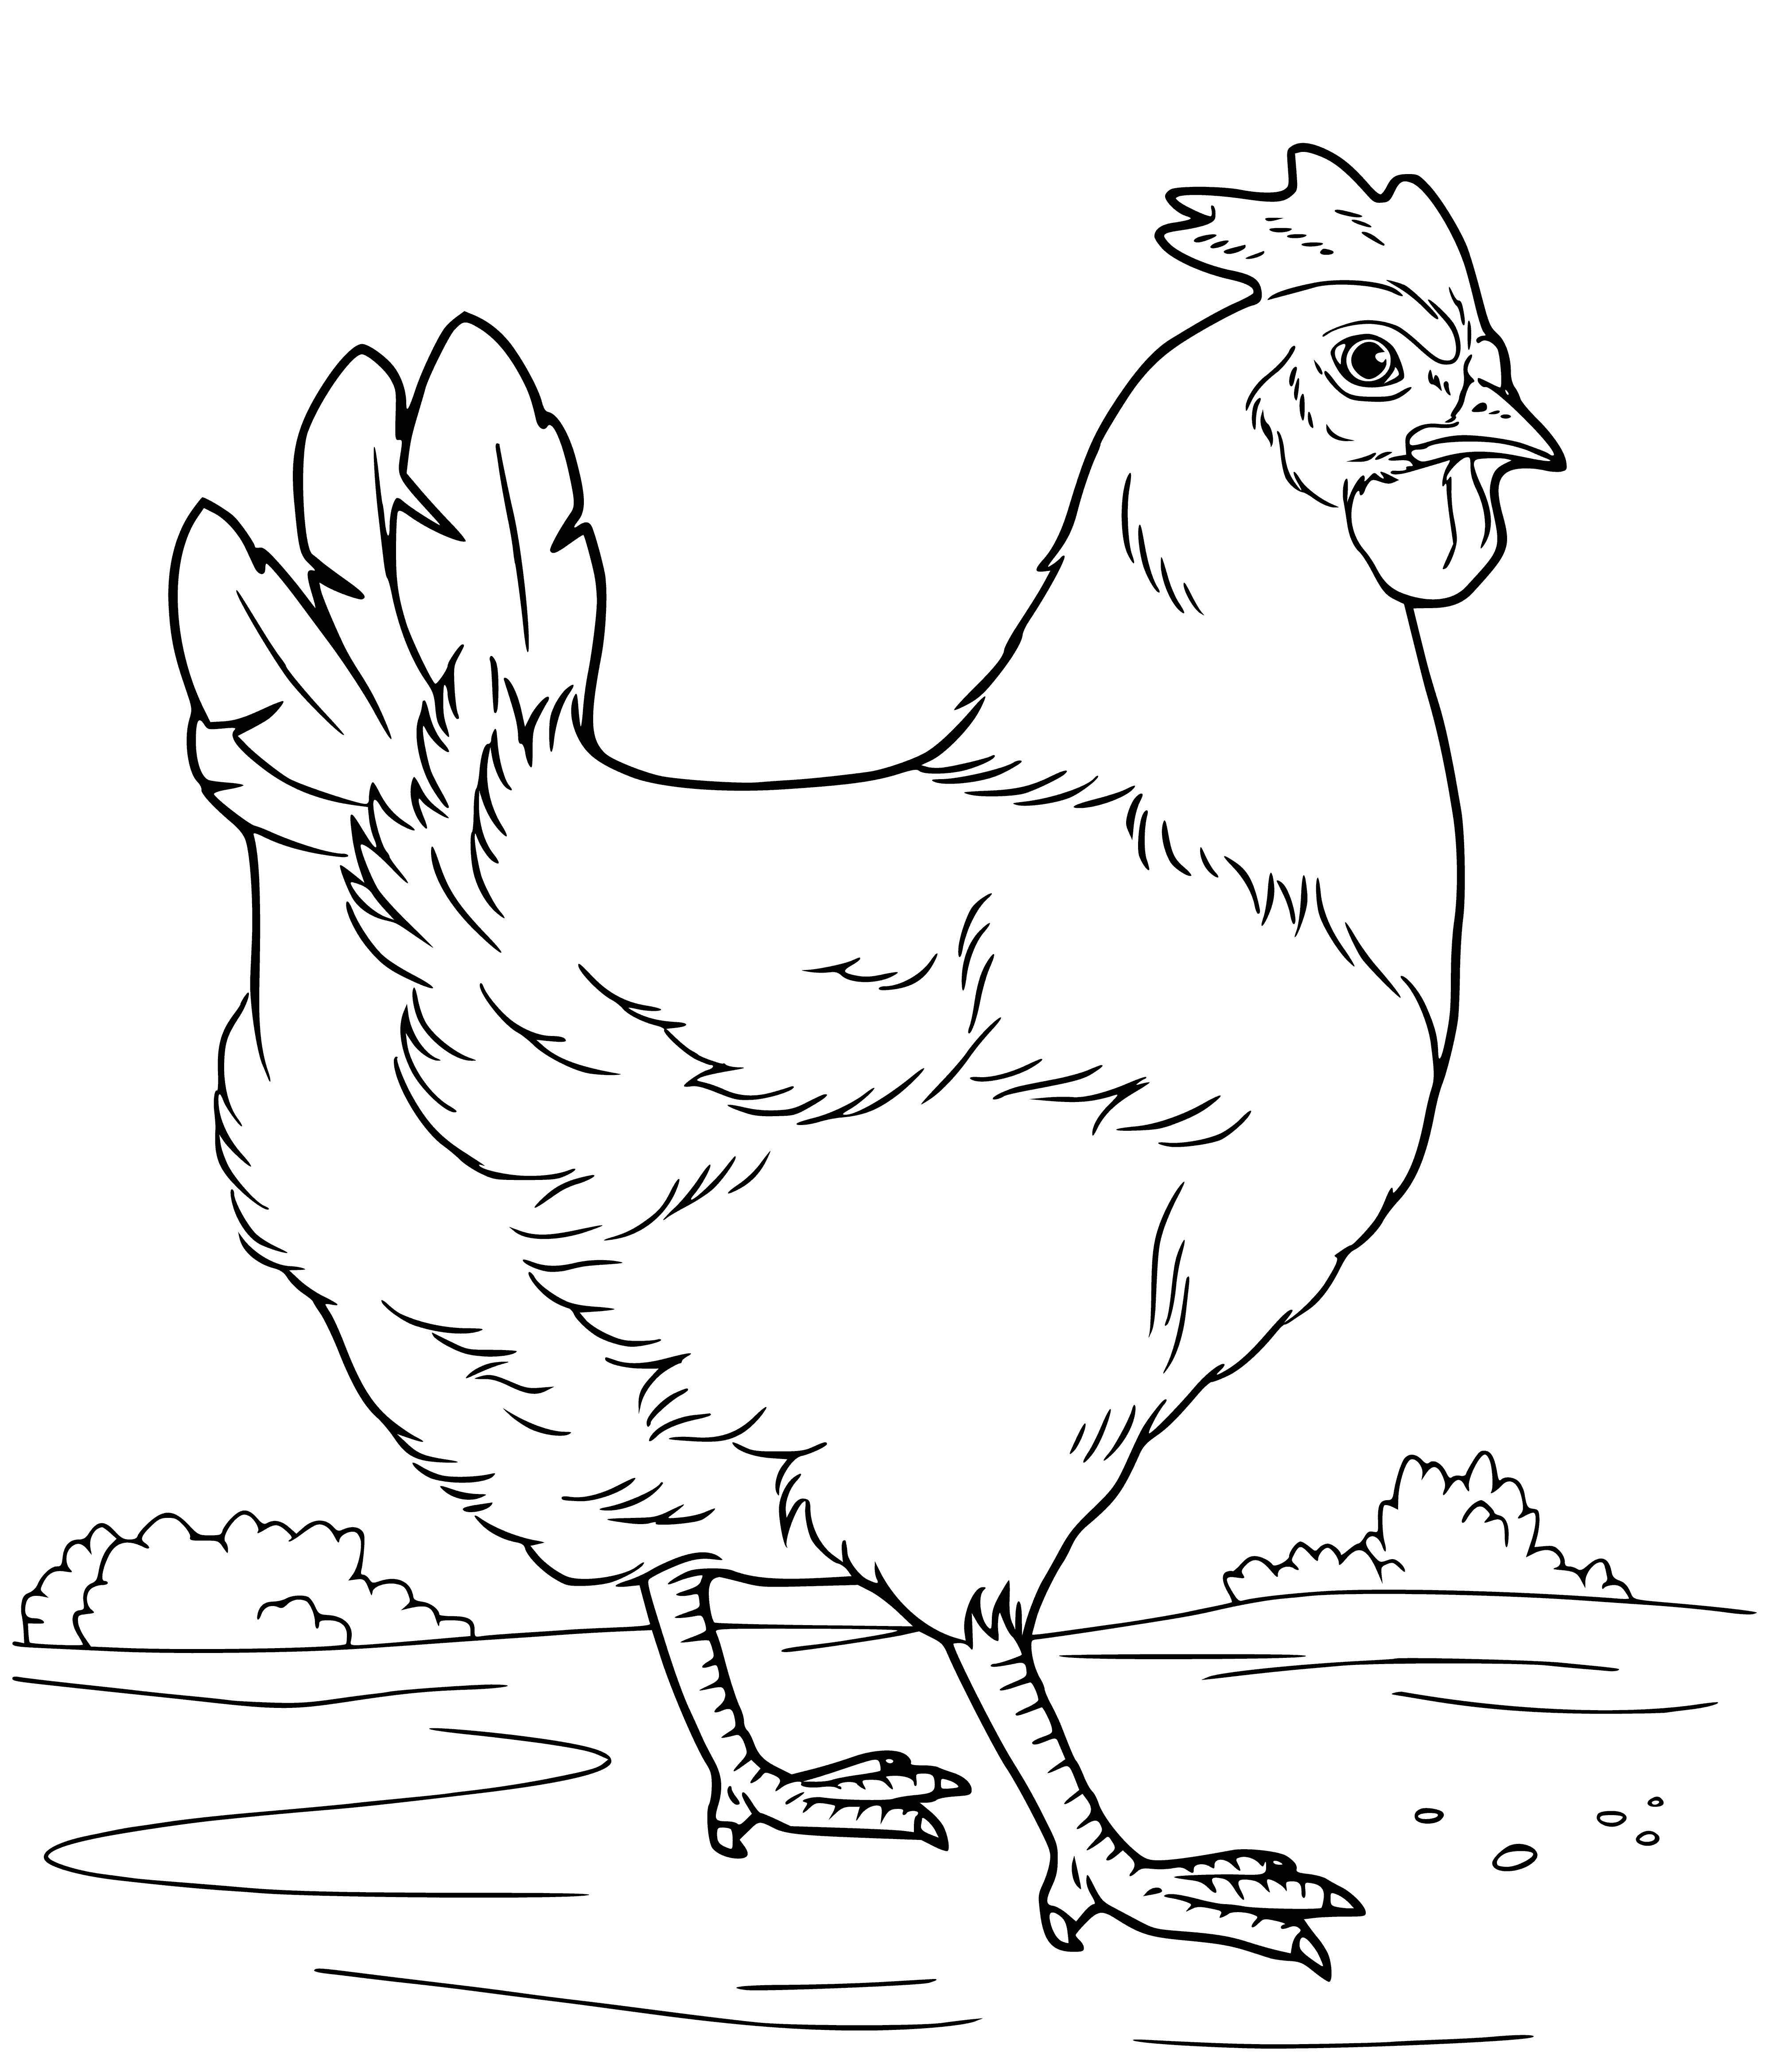 coloring page: Domesticated fowl kept by humans for eggs, meat, or feathers. Omnivorous, eating seeds, insects, and small rodents.